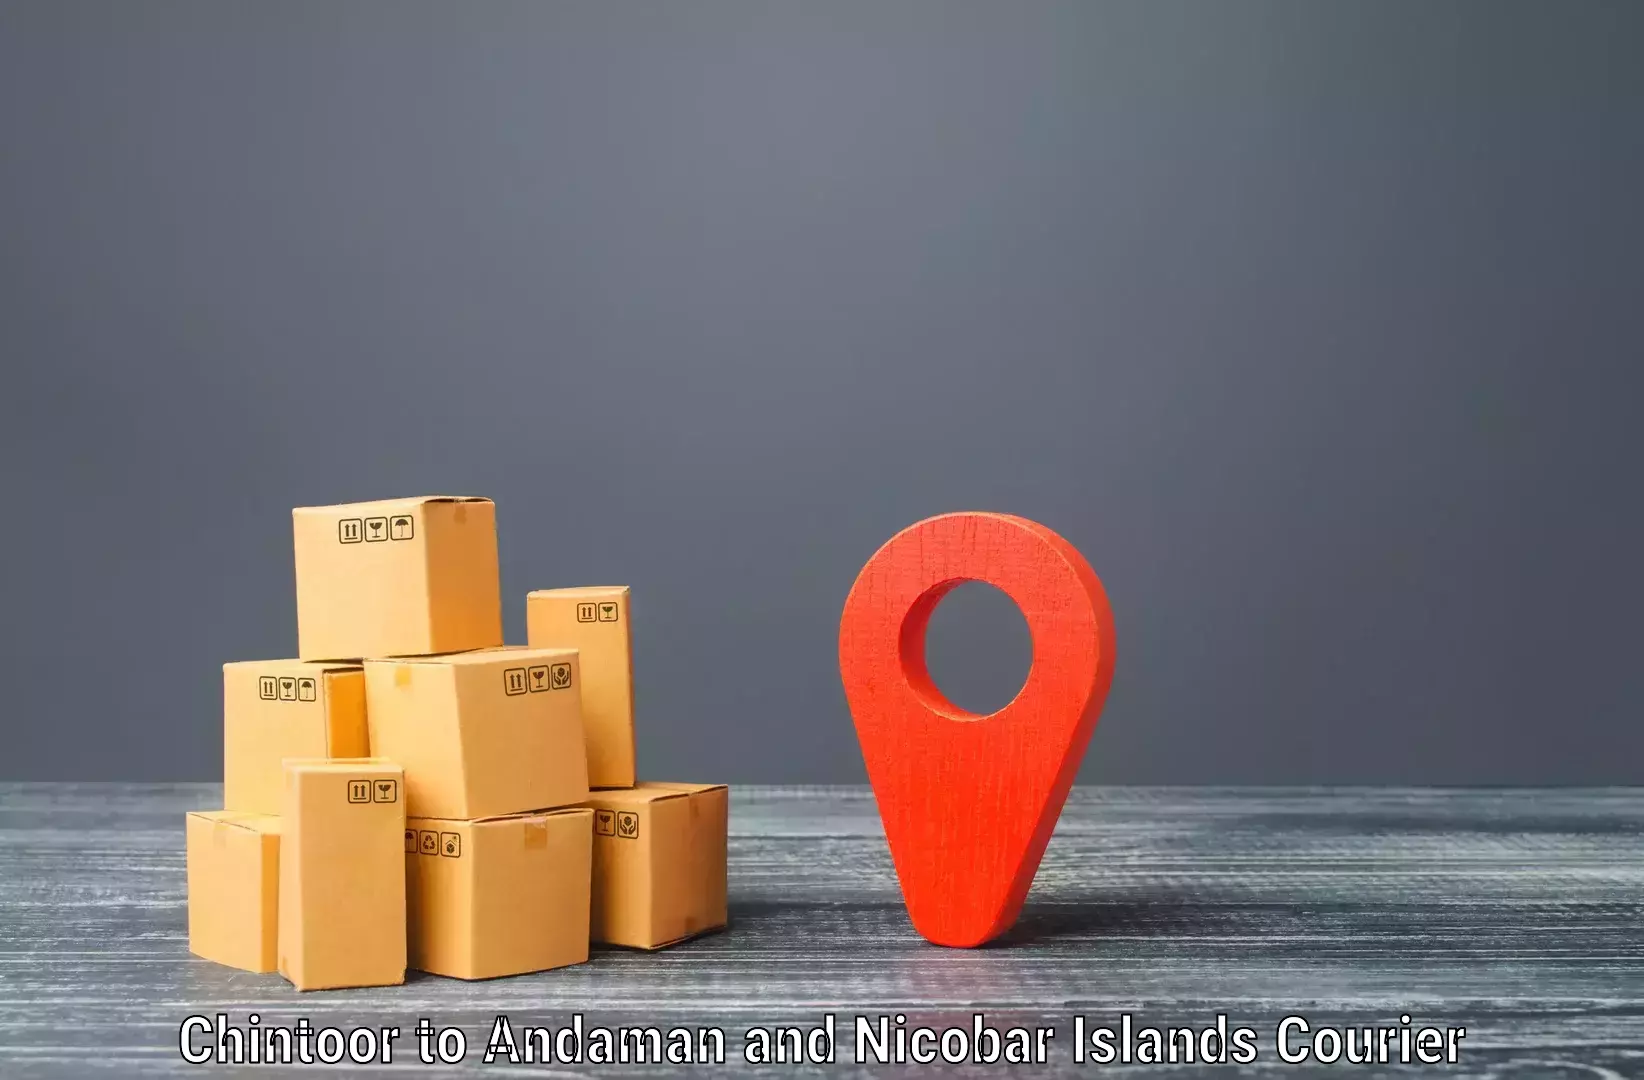 Customer-centric shipping Chintoor to Andaman and Nicobar Islands